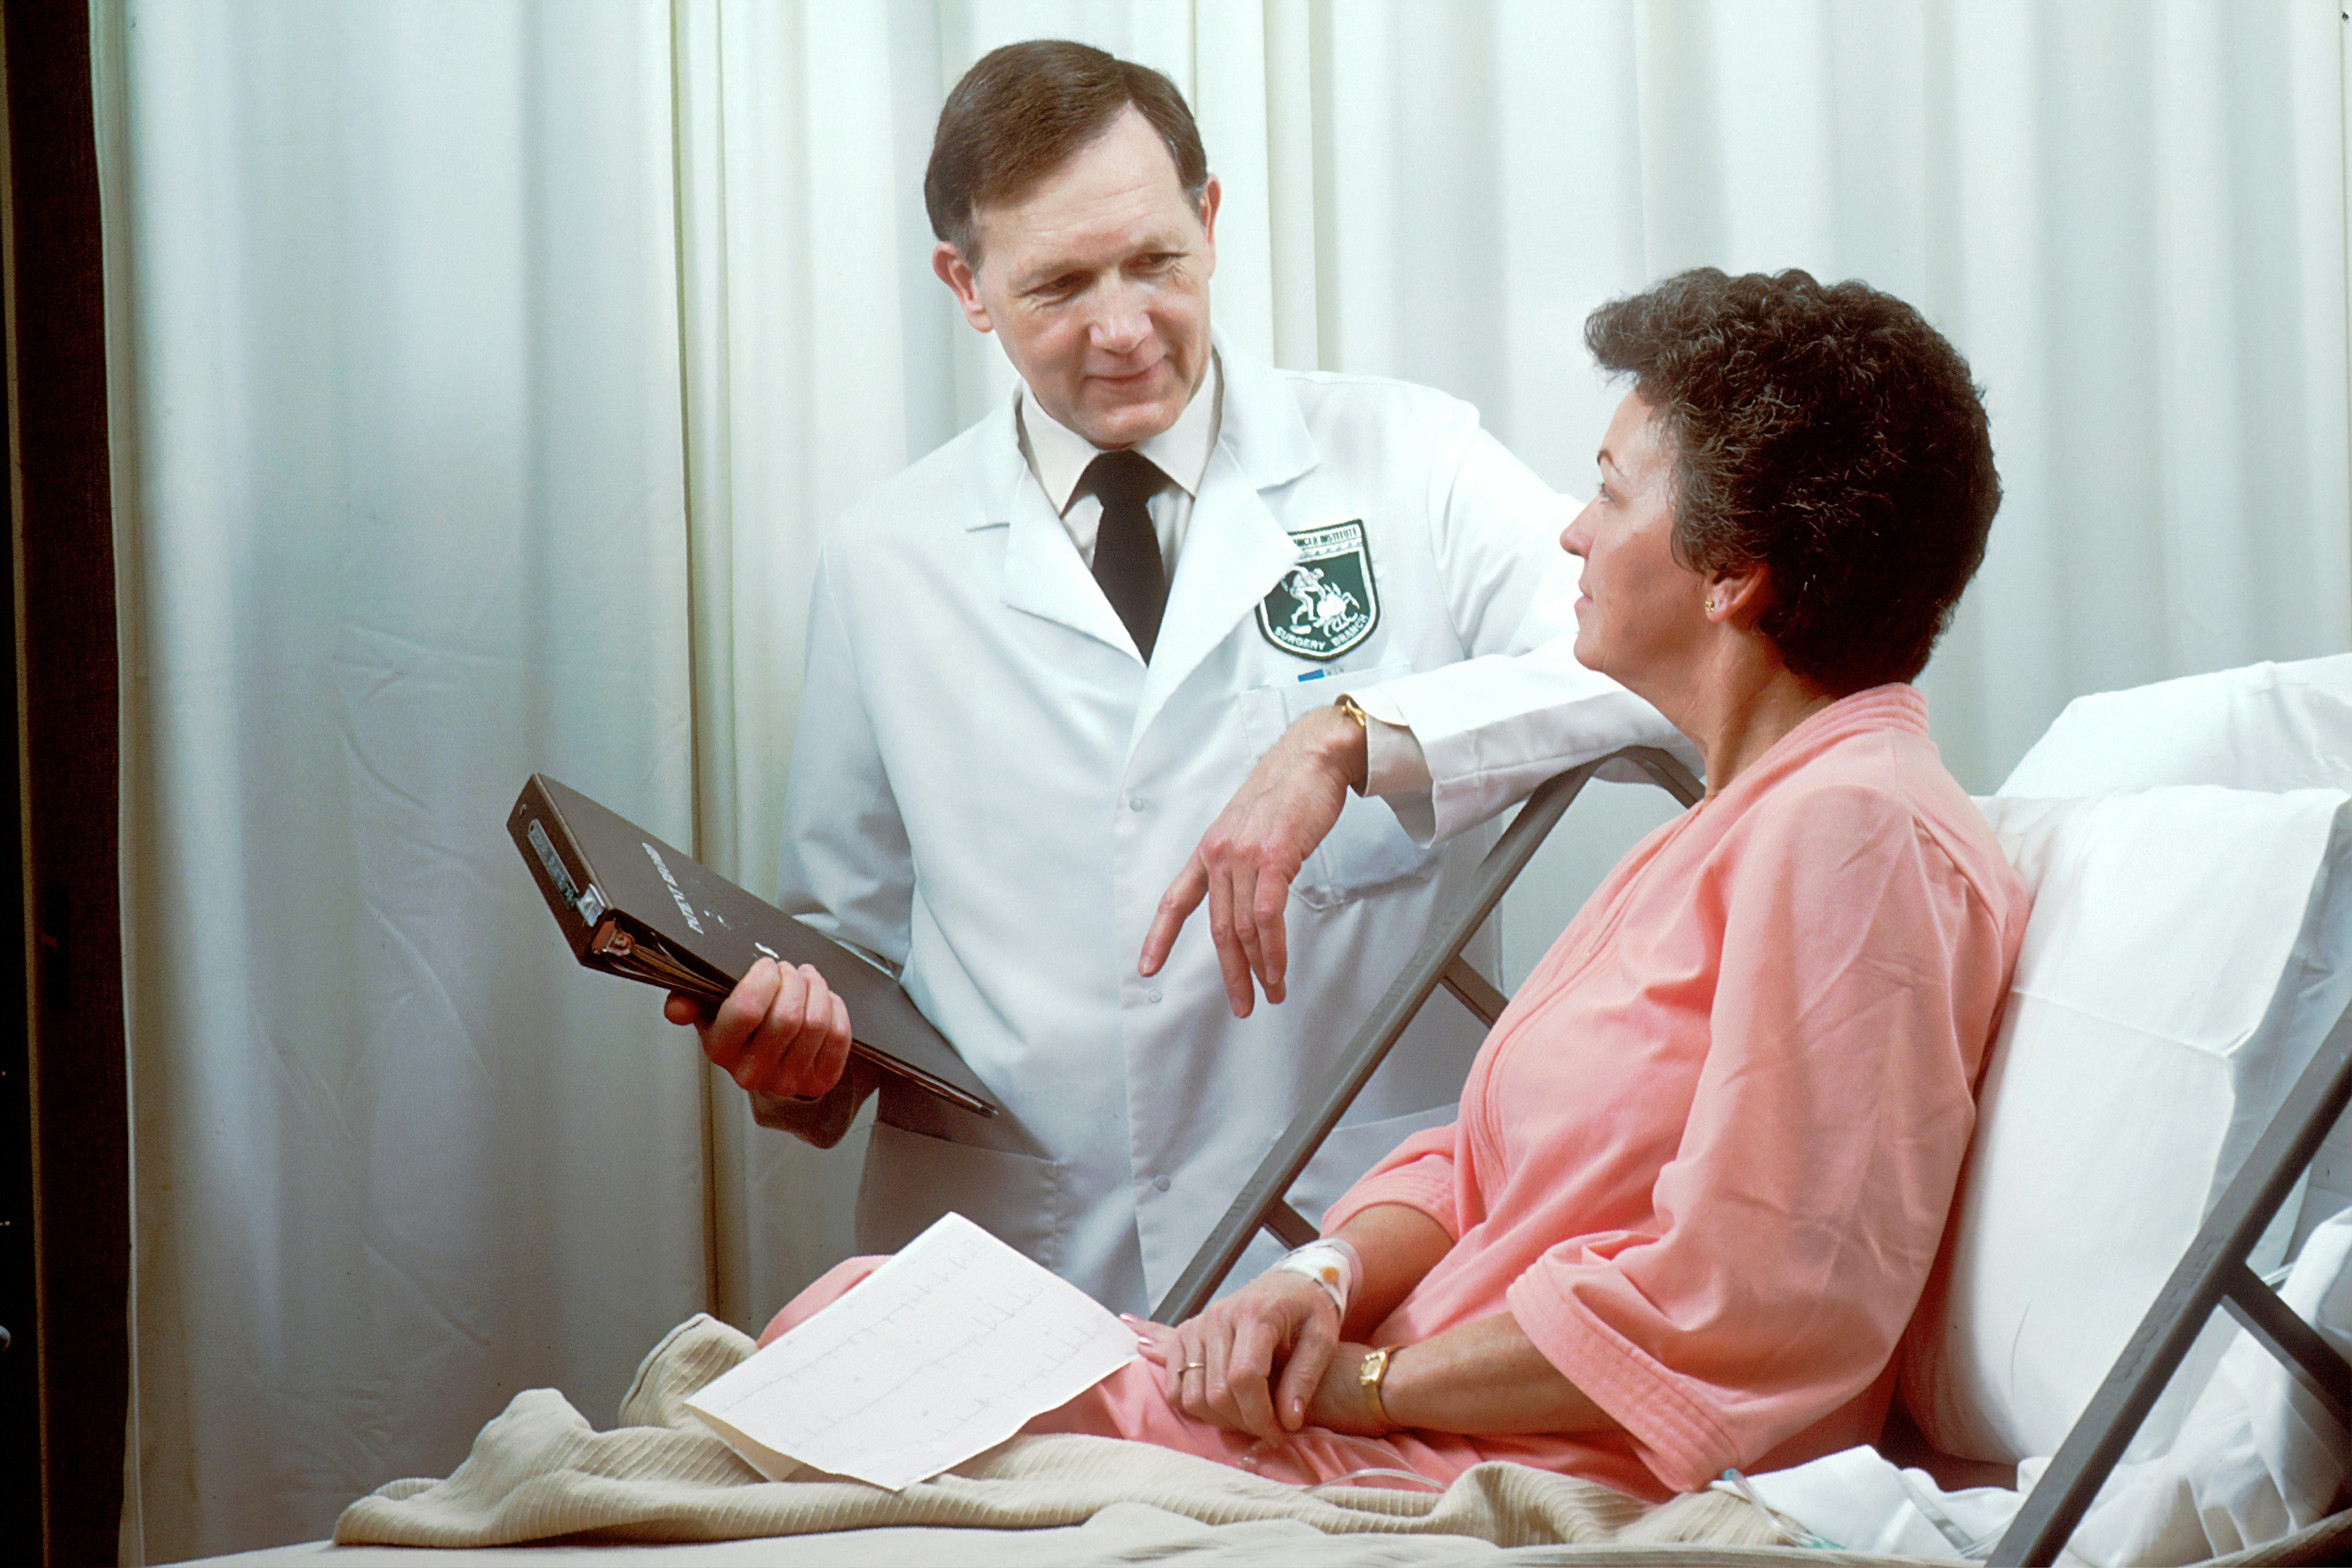 A white doctor standing over and speaking with a white patient laying in a hospital bed